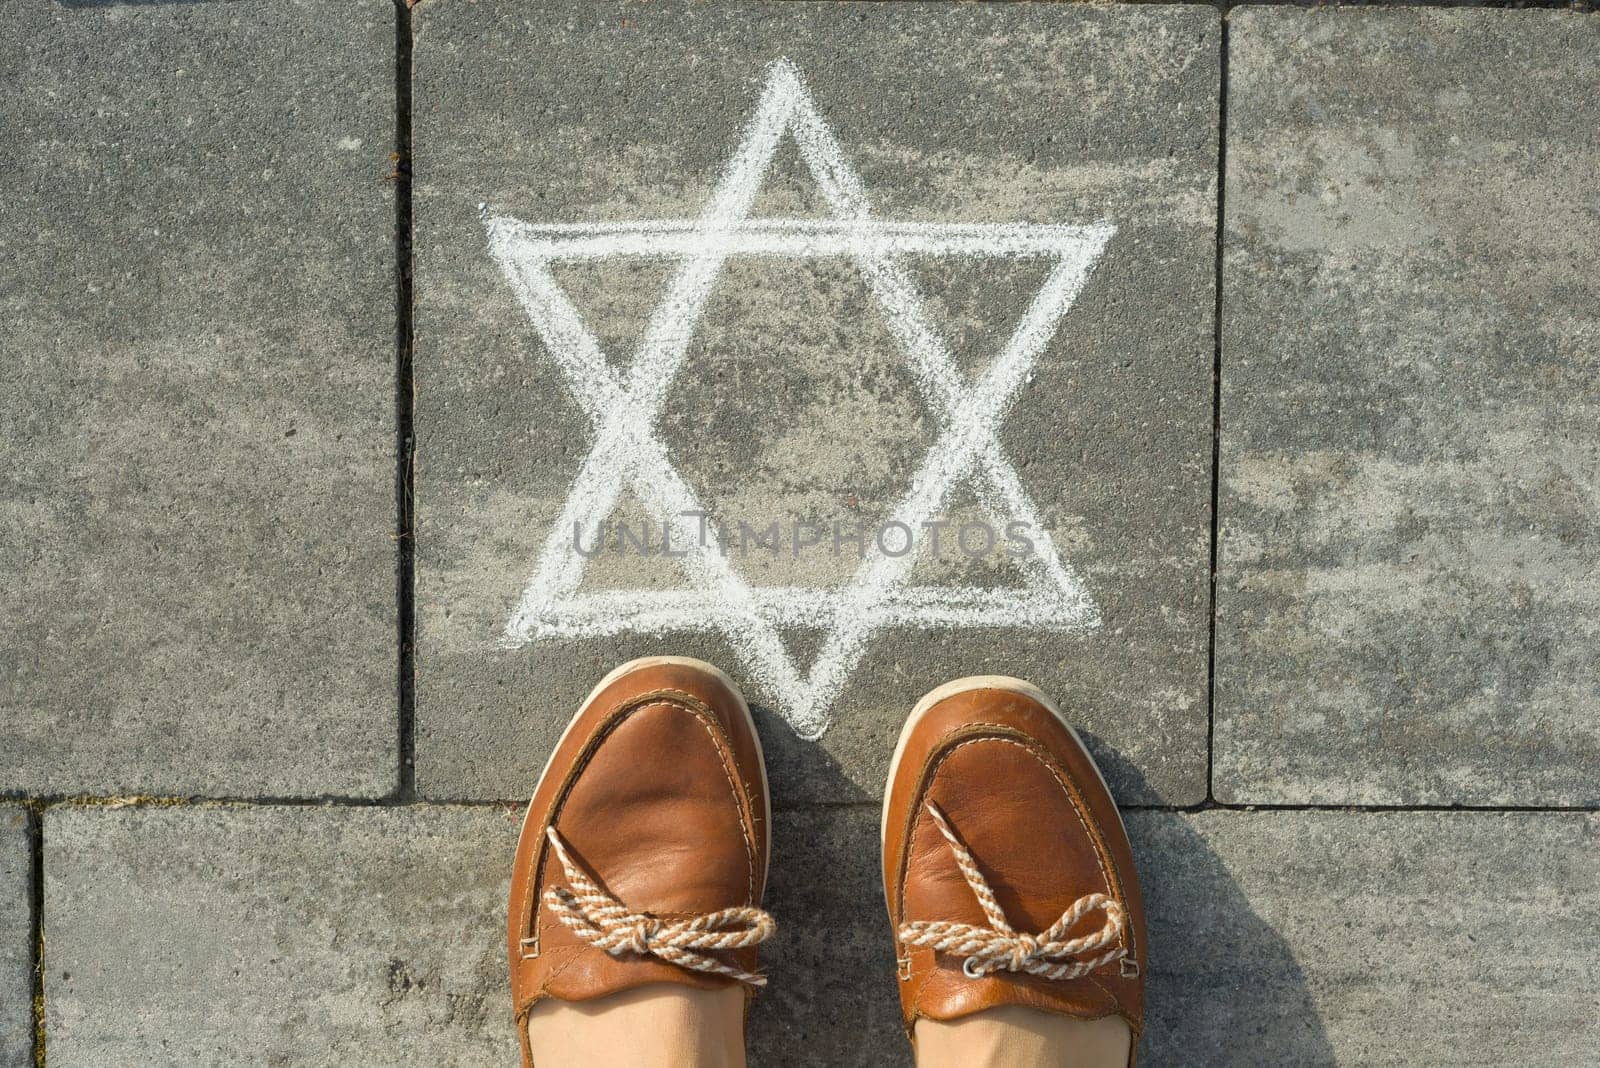 Female feet with abstract image of six pointed star, written on grey sidewalk by VH-studio